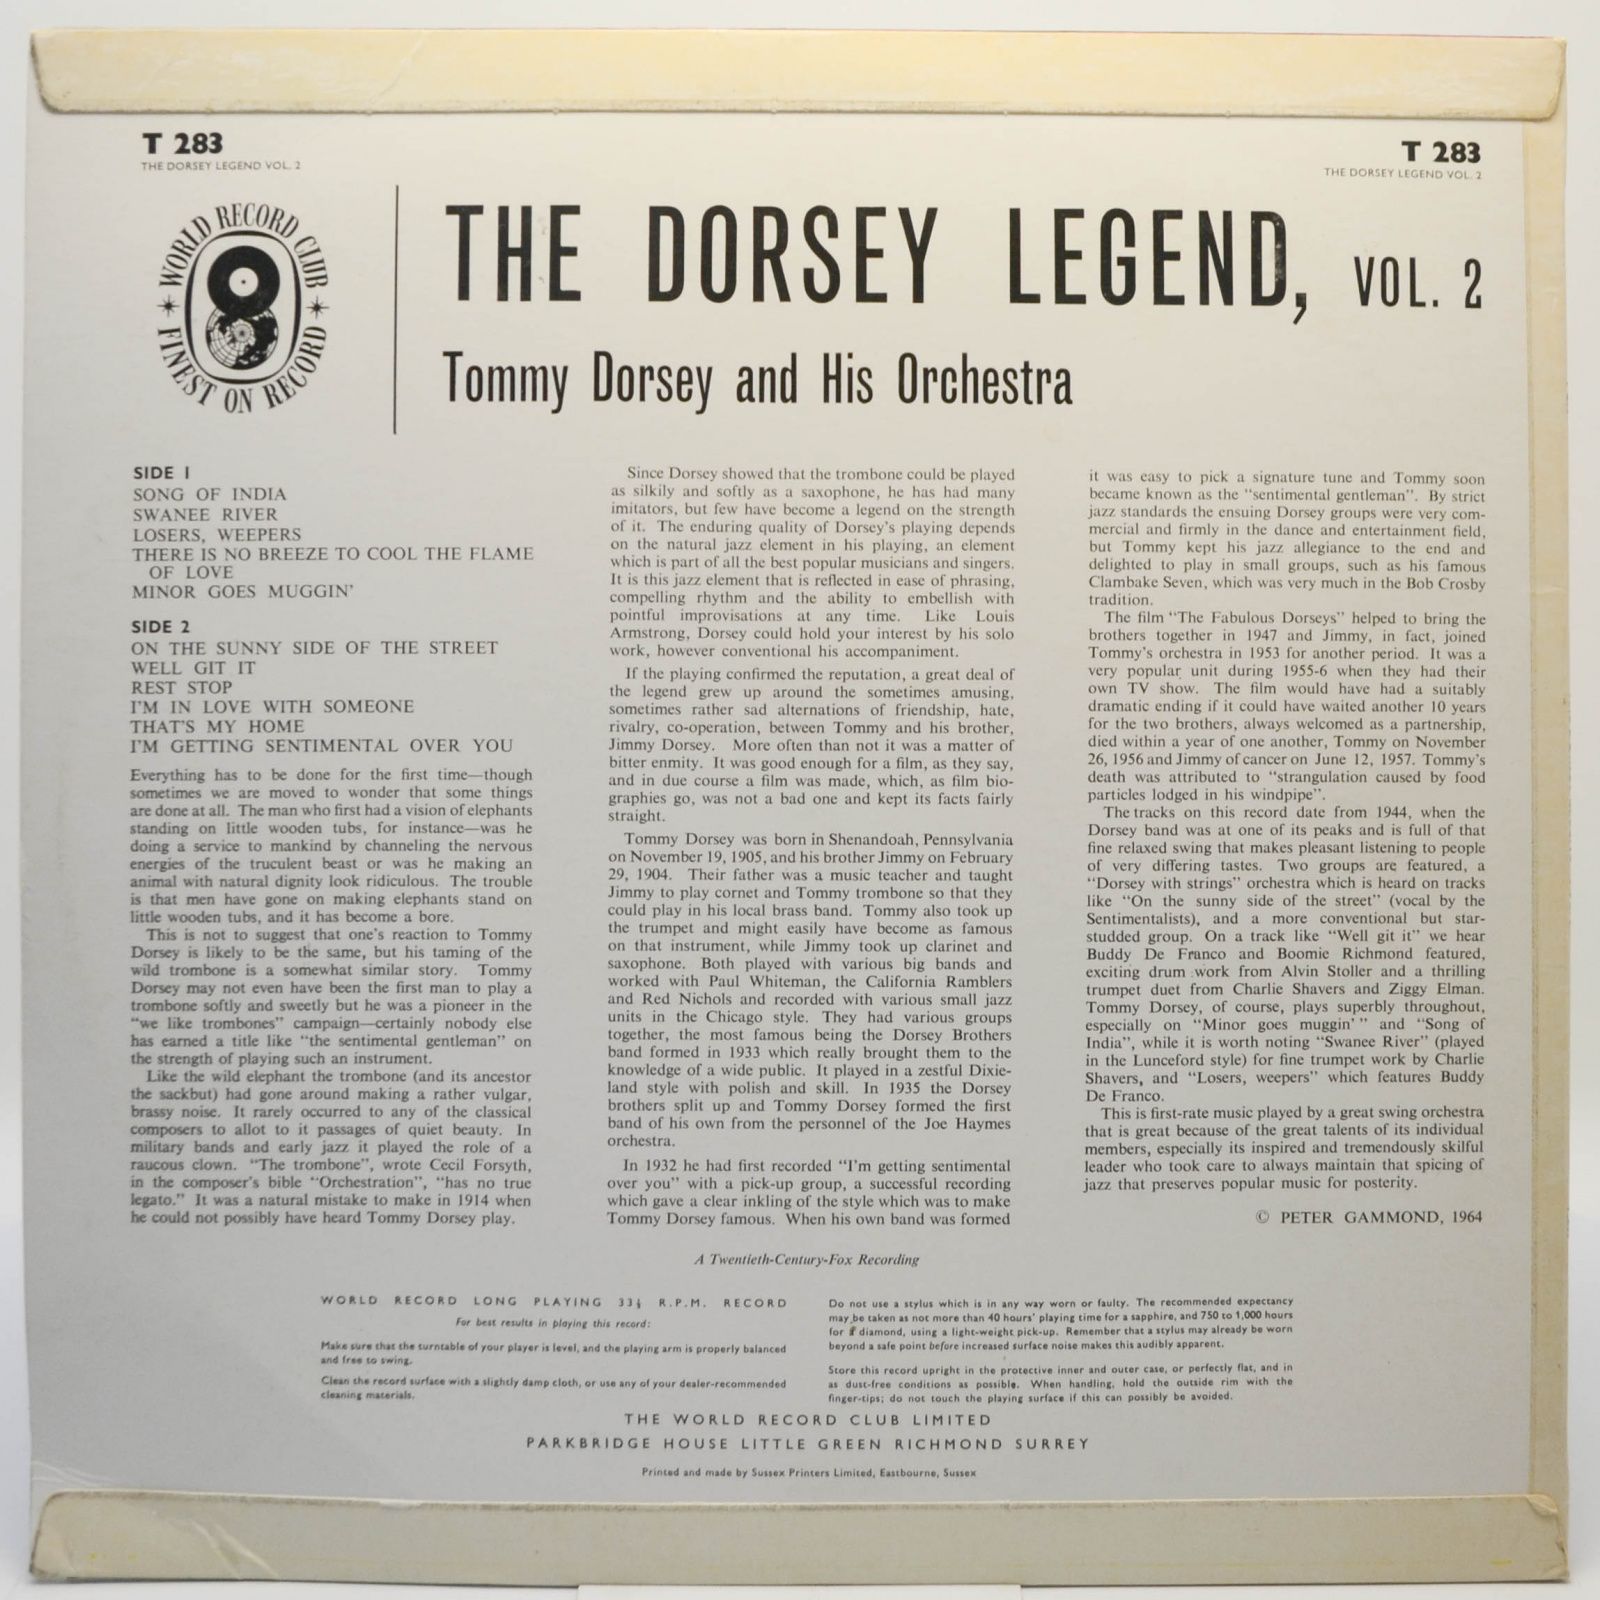 Tommy Dorsey And His Orchestra — The Dorsey Legend Vol. 2, 1964